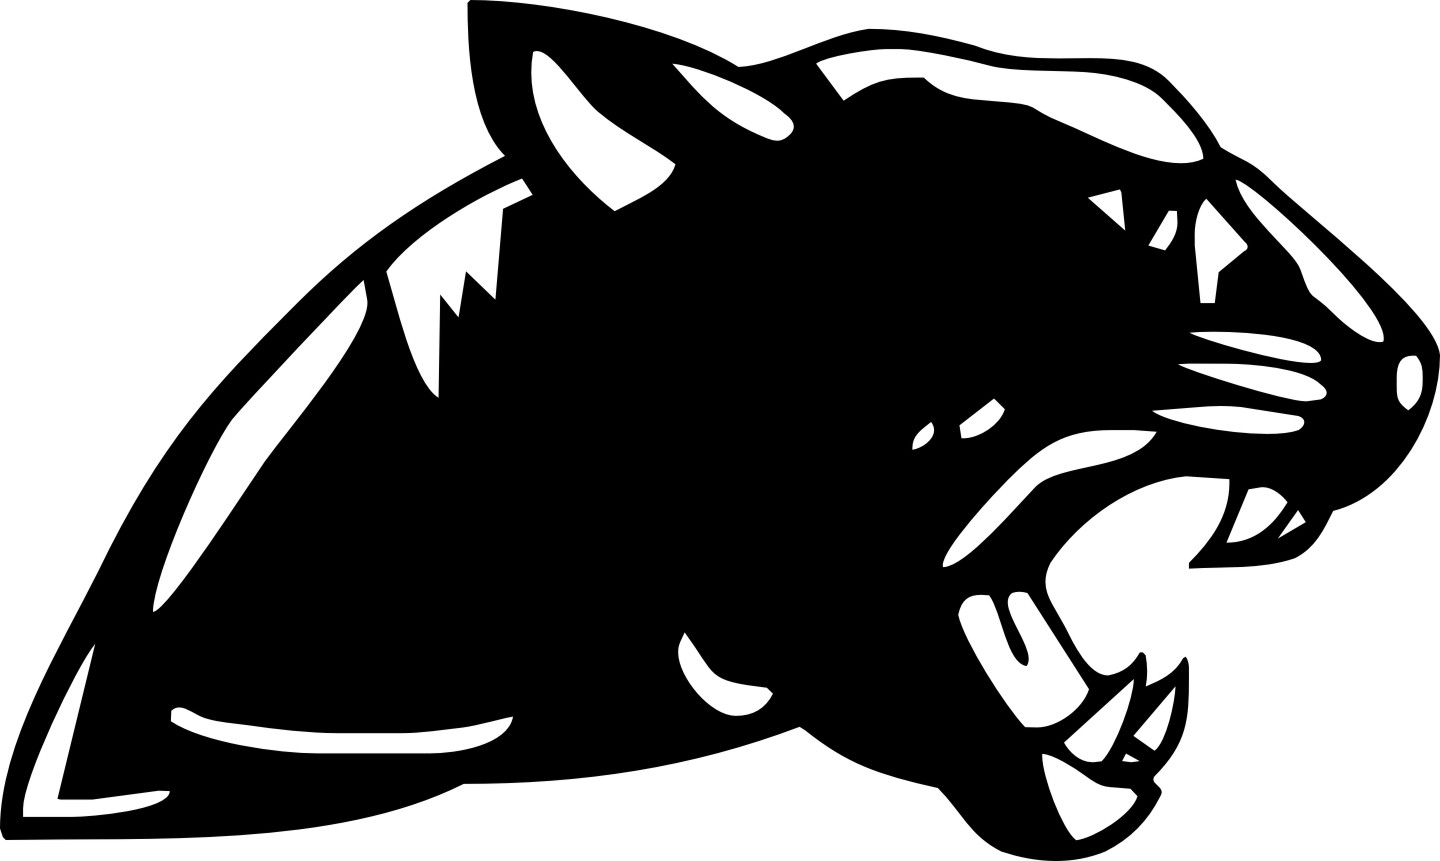 Panther clipart icon. Free cougar head cliparts